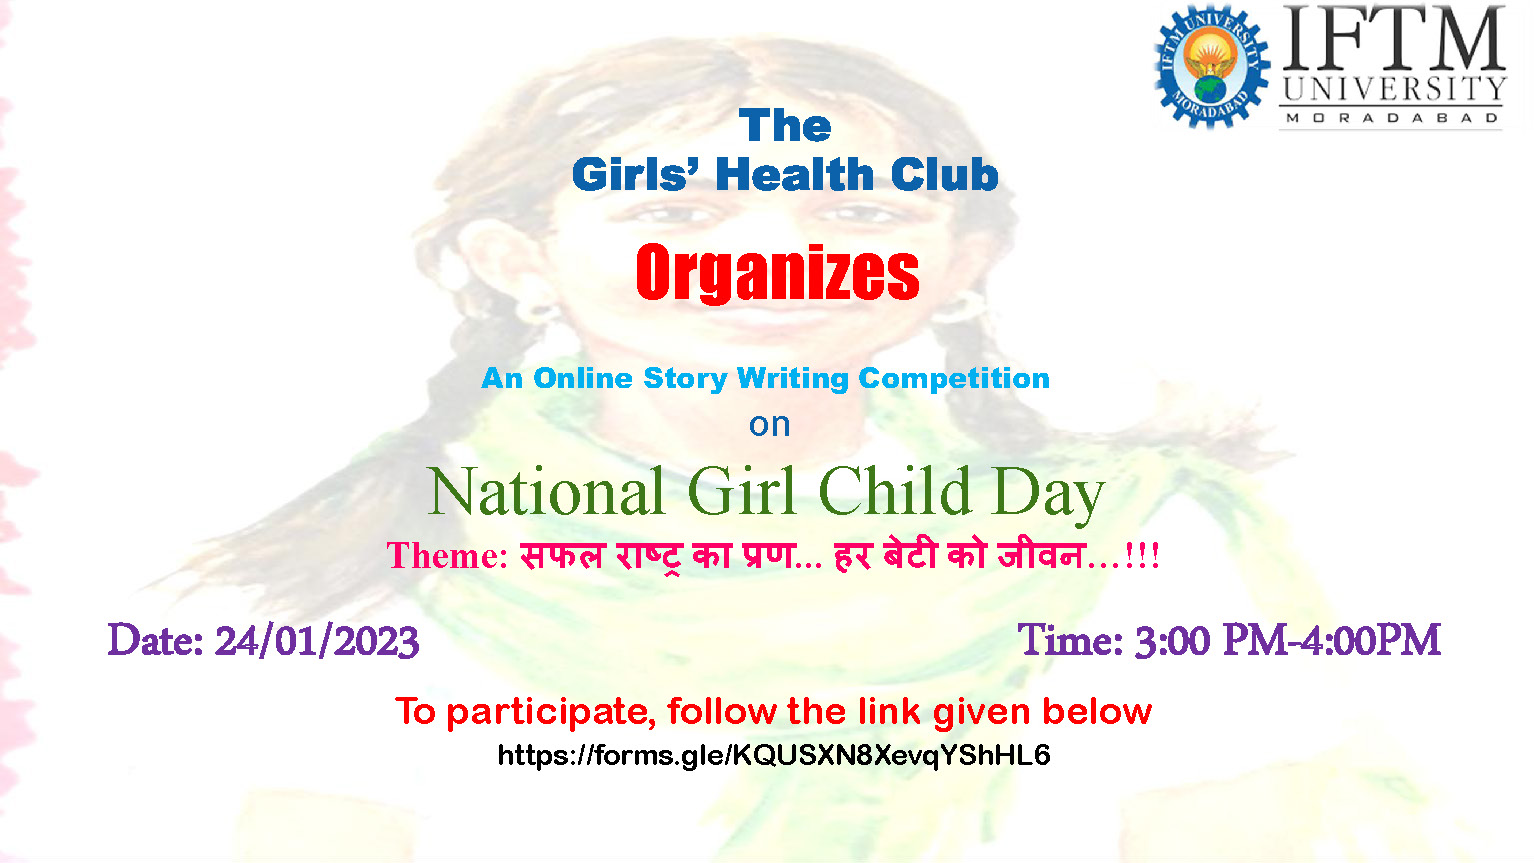 Story Writing Competition on National Girl Child Day